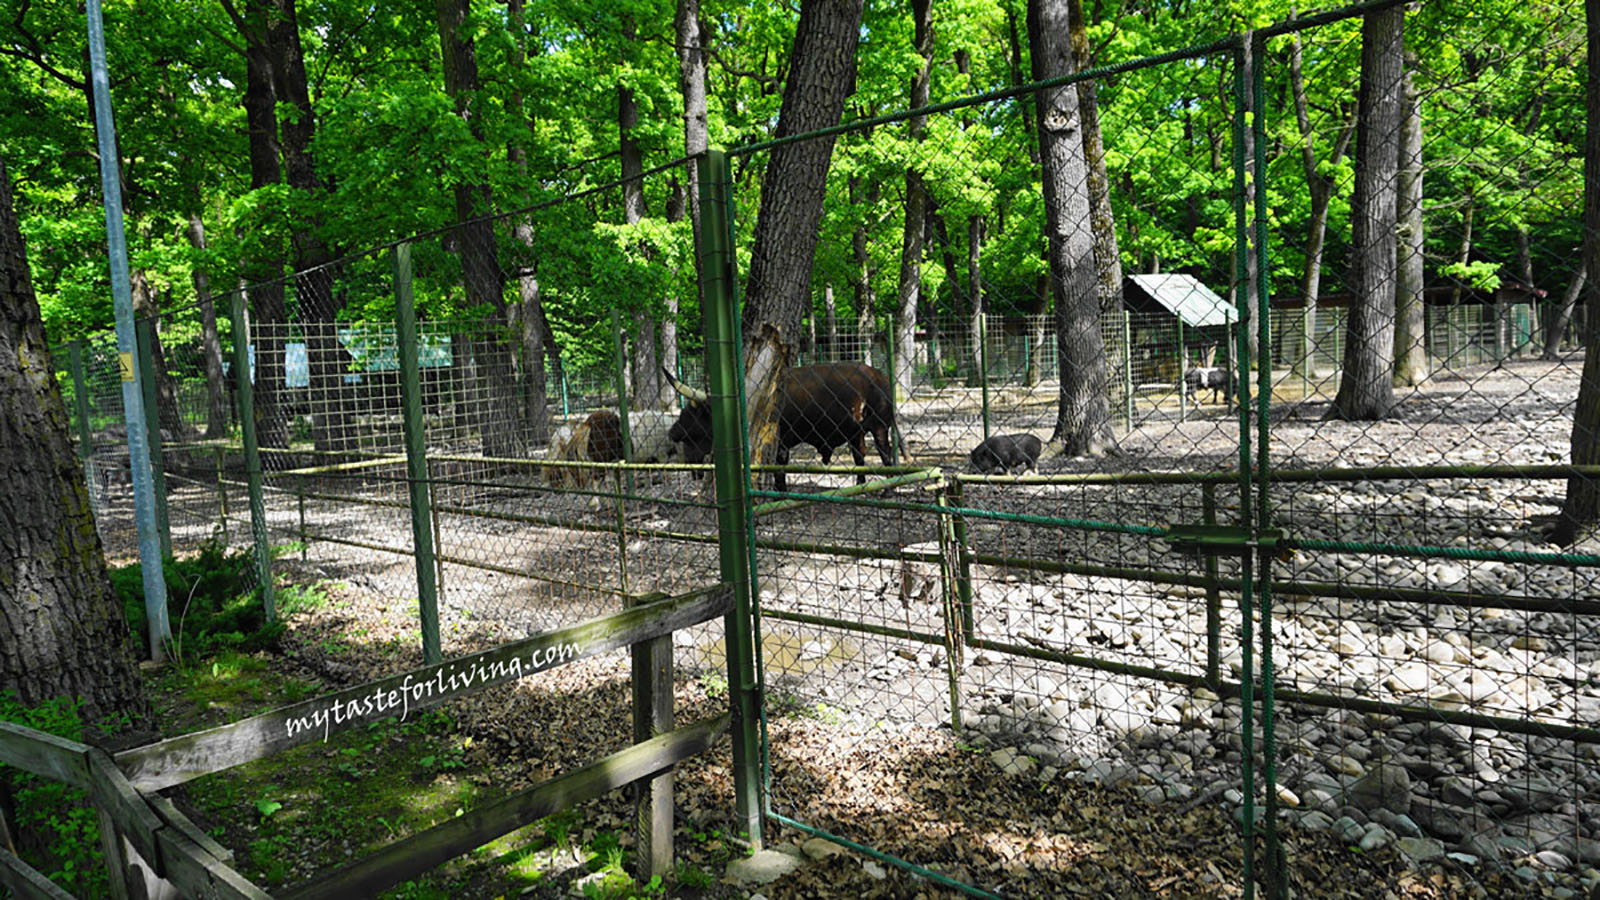 The zoo in Pitesti, Romania, is located in the natural Forest Park "Trivale" and it was definitely a pleasant destination to visit.